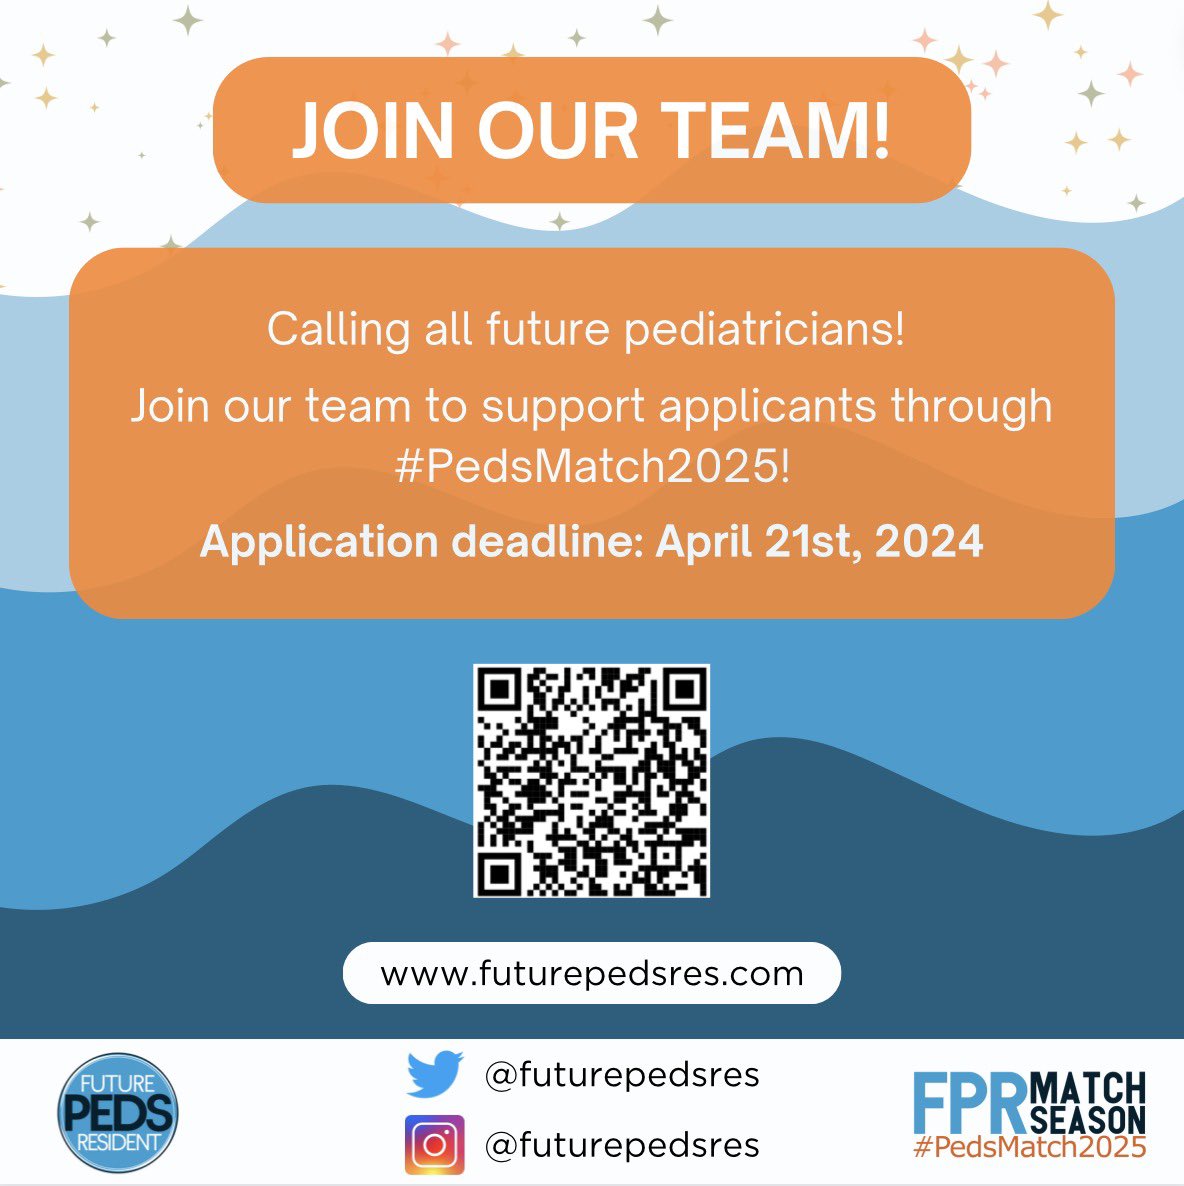 🚨Calling all medical students and residents🚨 Applications are now open for the #PedsMatch2025 @FuturePedsRes team!✨ forms.gle/dJ17ToSRazGqp2… 🗓️ The deadline to apply is April 21st at 11:59PM EST.